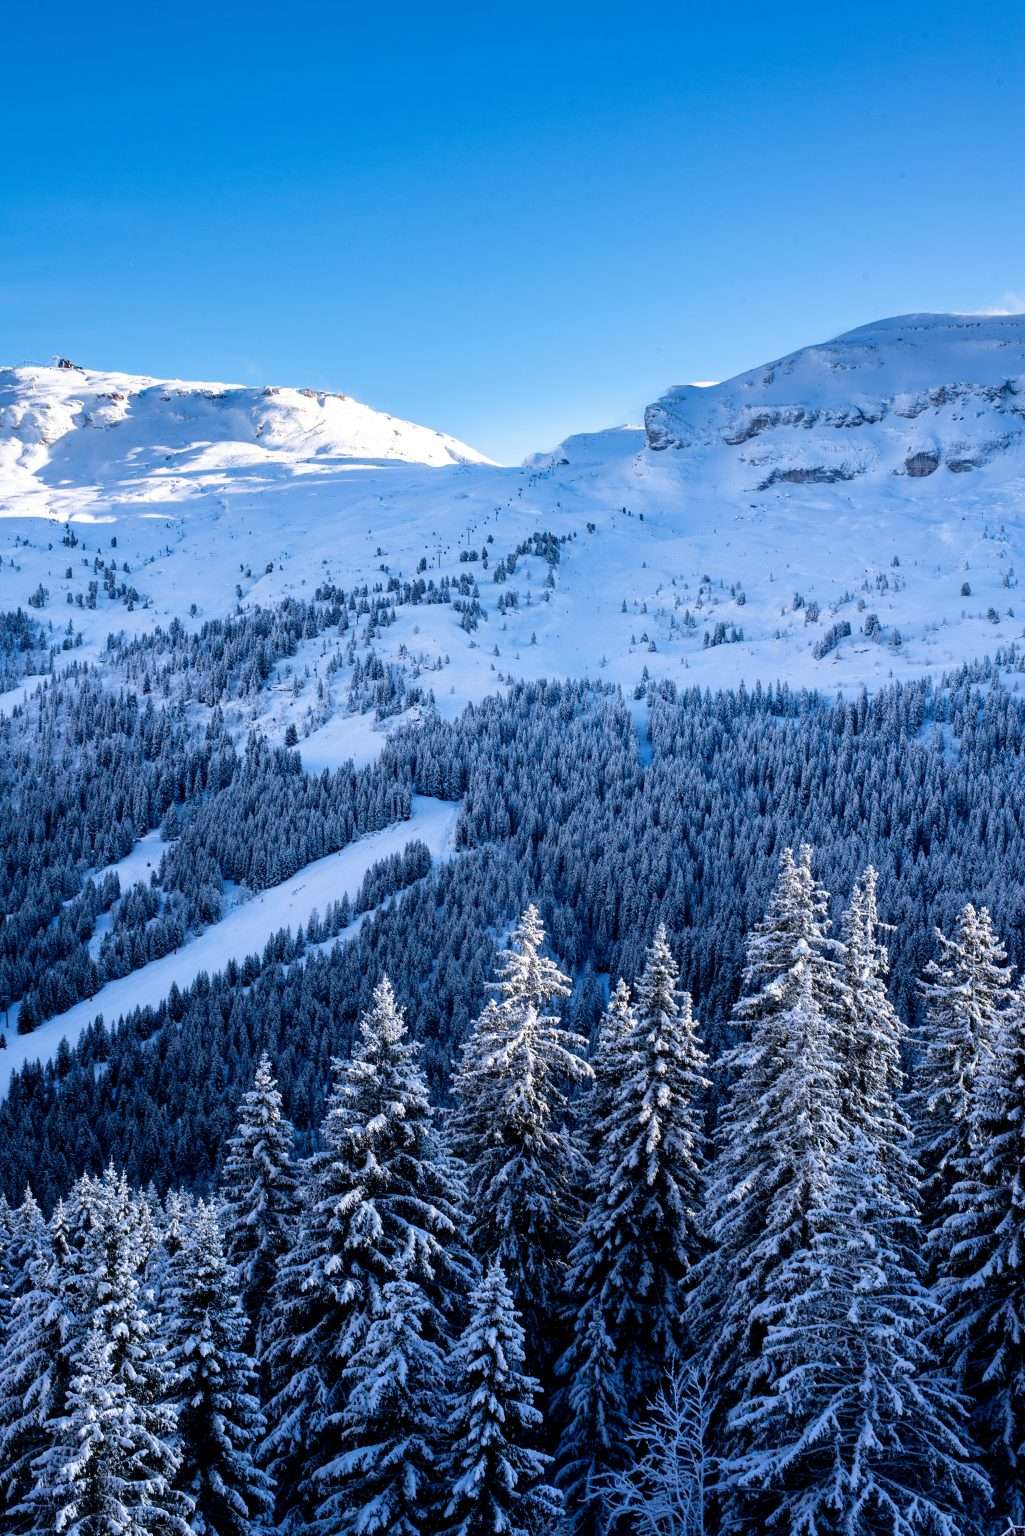 Our Geneva to Flaine transfer will get you to the resort in privacy and comfort.